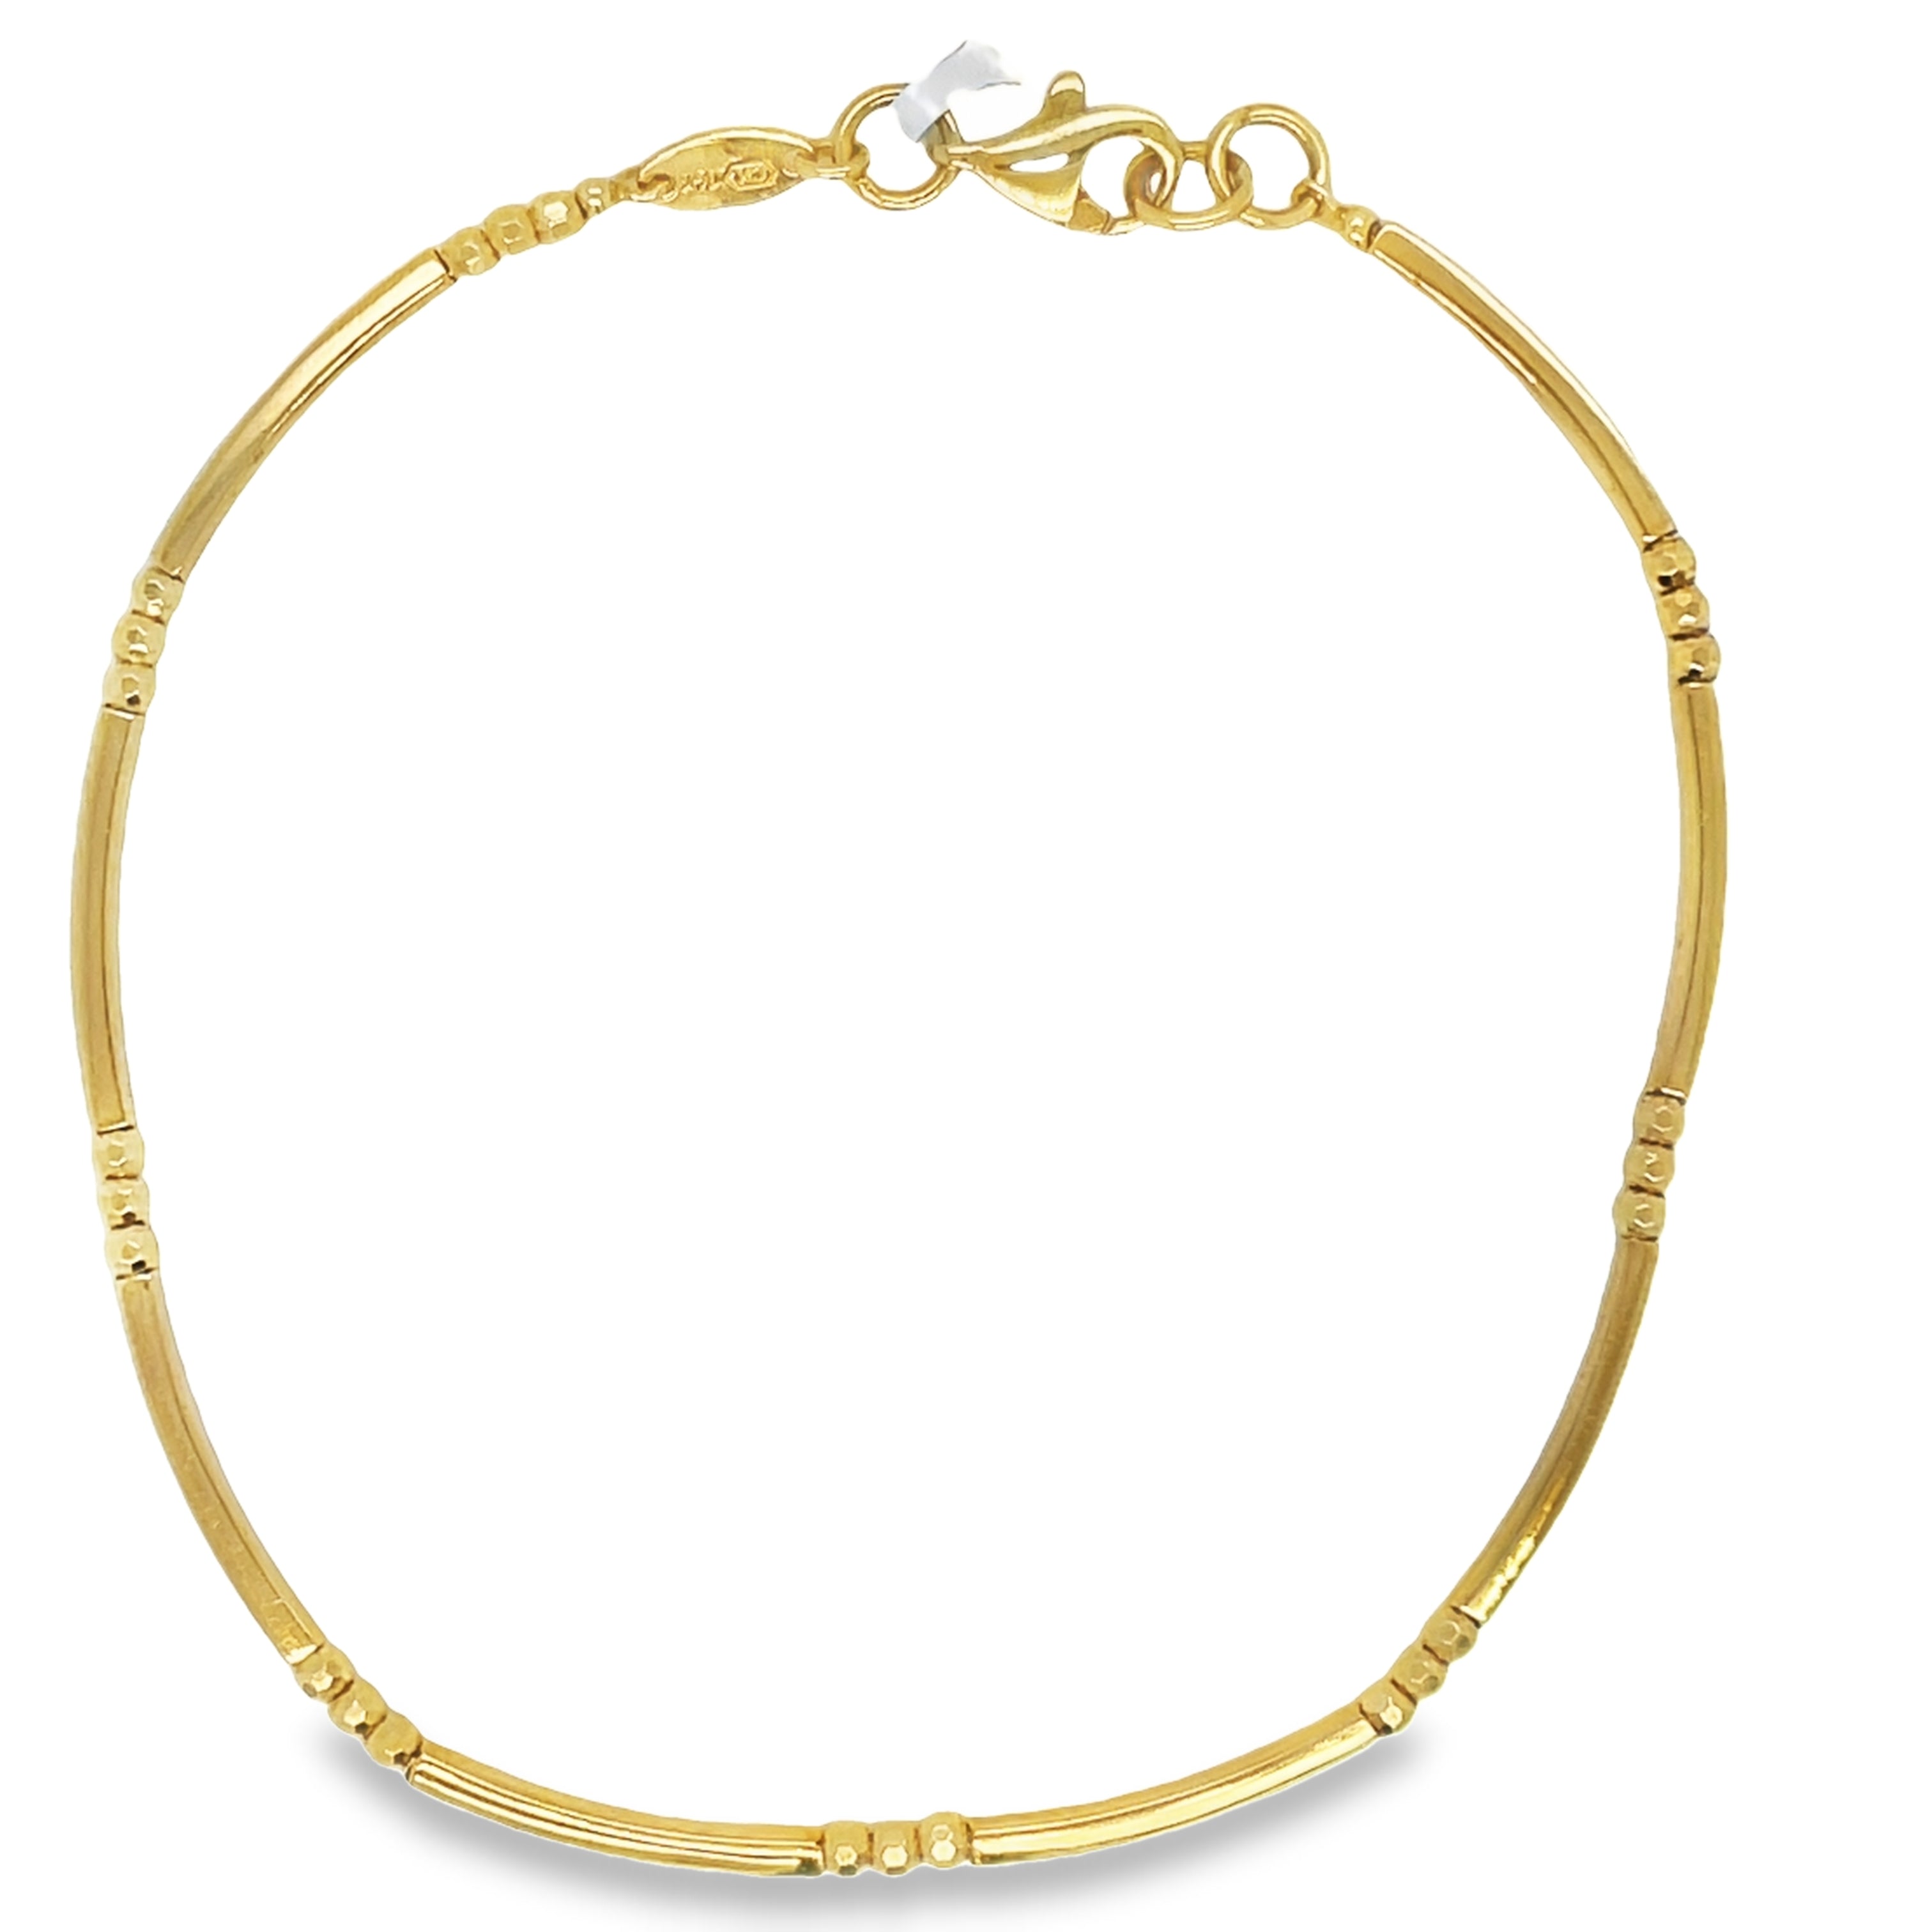 This 14k yellow gold bracelet features sectional curves, adding an elegant and unique touch. With a secure lobster clasp, it stays put all day. At 7 inches in length, it's the perfect size for most wrists, making it a versatile and luxurious addition to any jewelry collection.